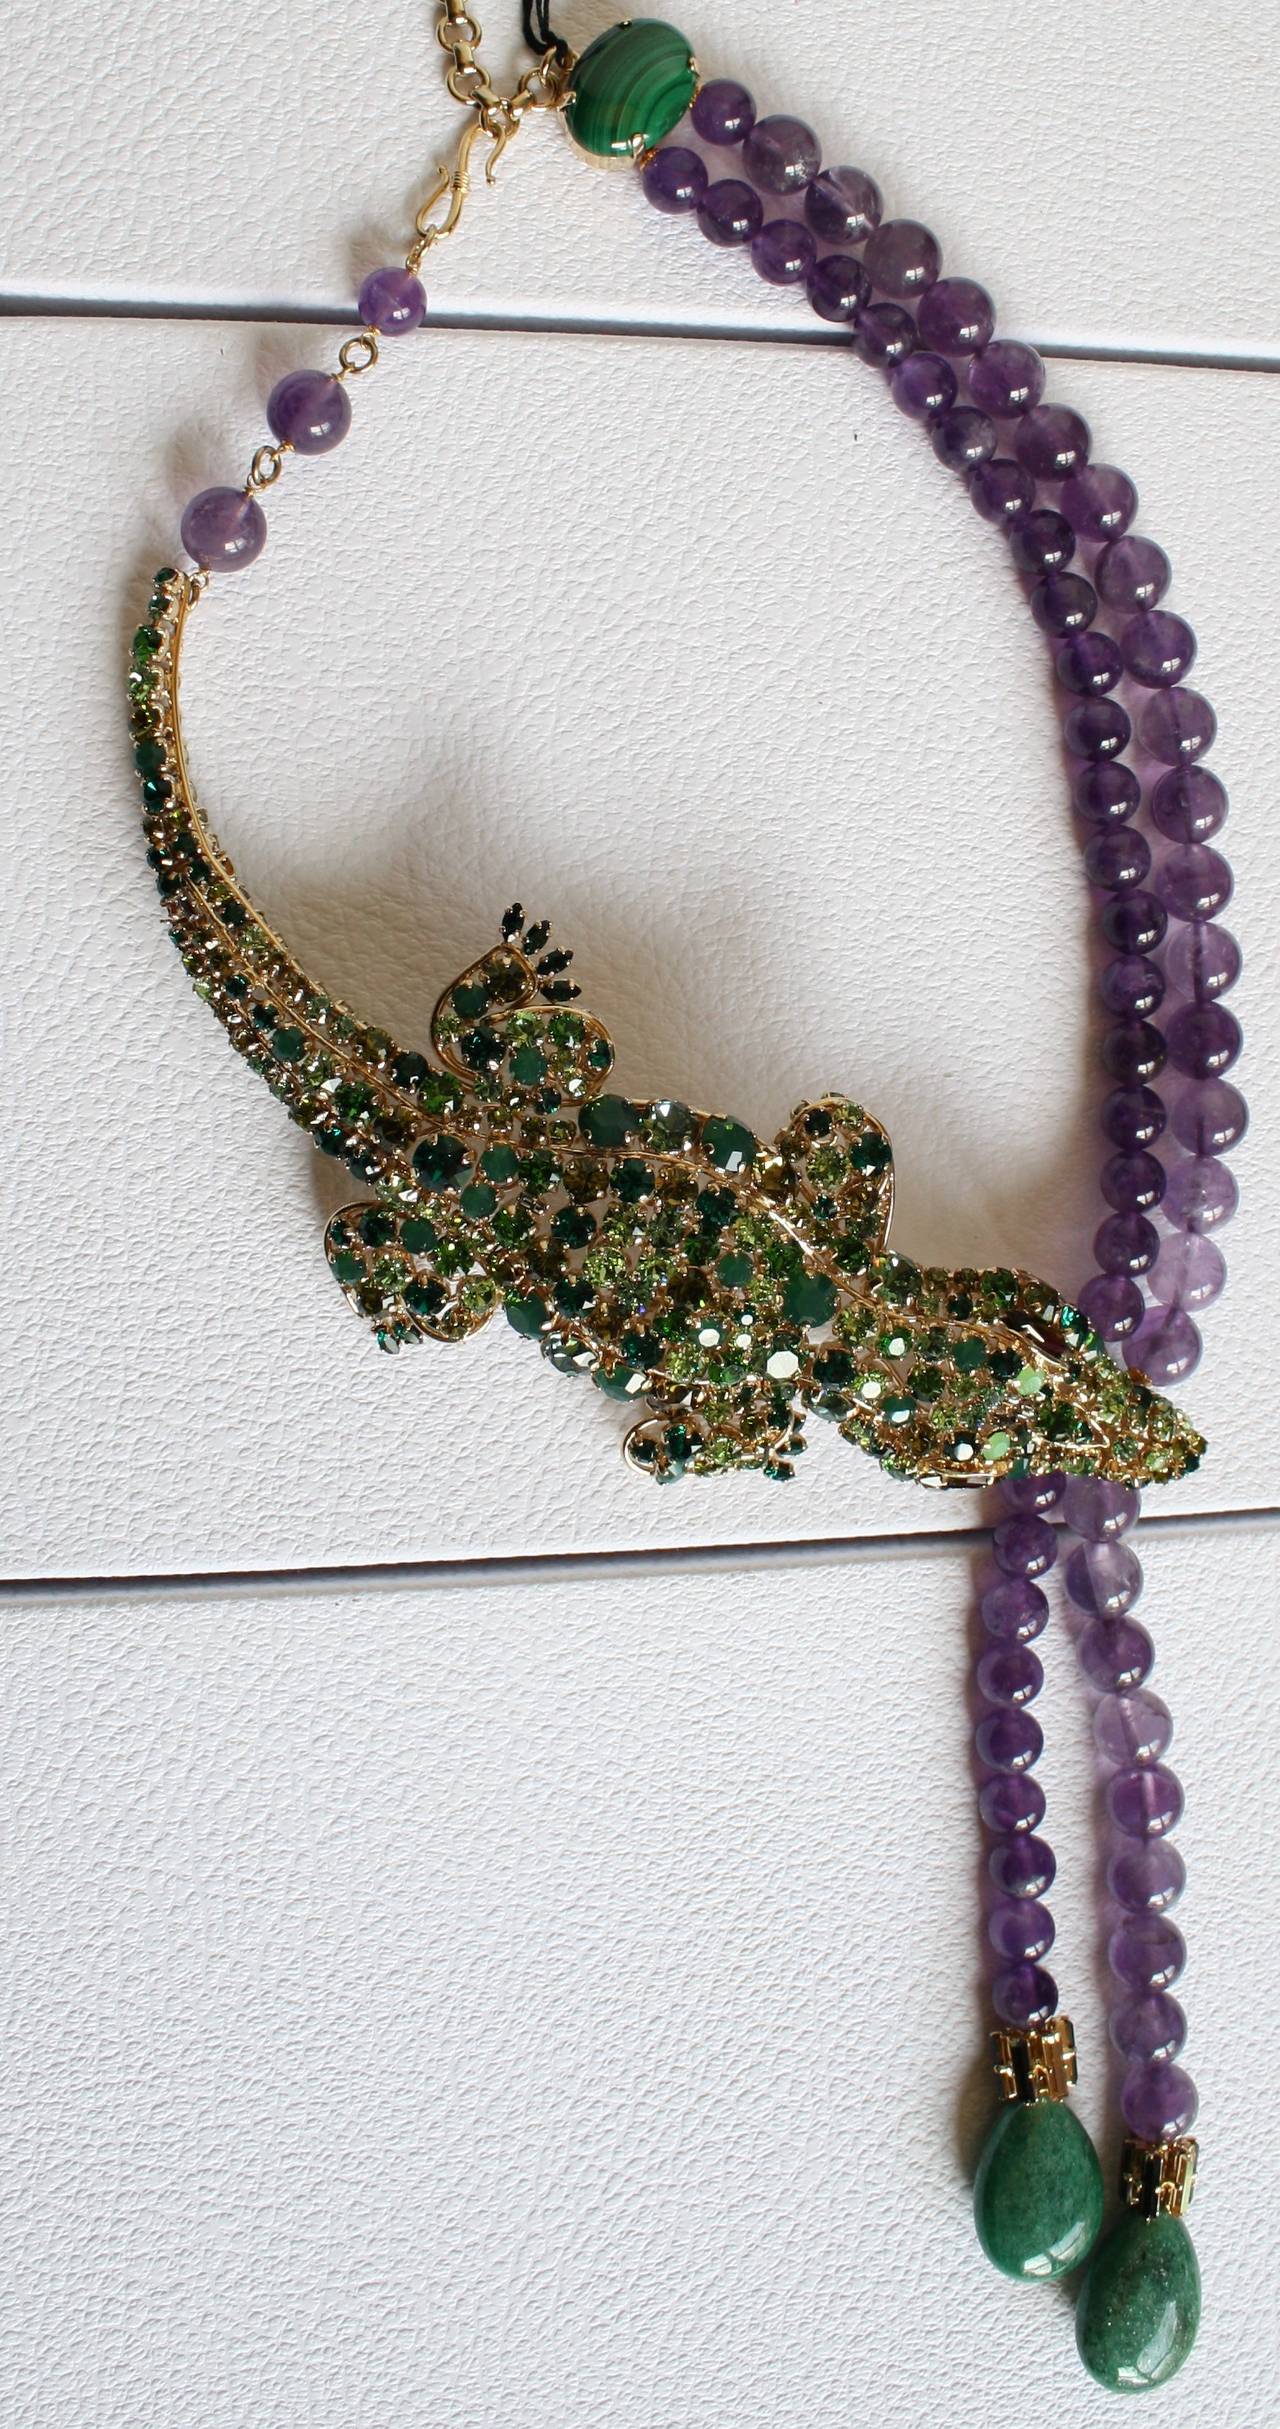 An extraordinary limited edition crocodile necklace from Philippe Ferrandis. Made with Swarovski crystals, amethyst beads, and serpentine.

18